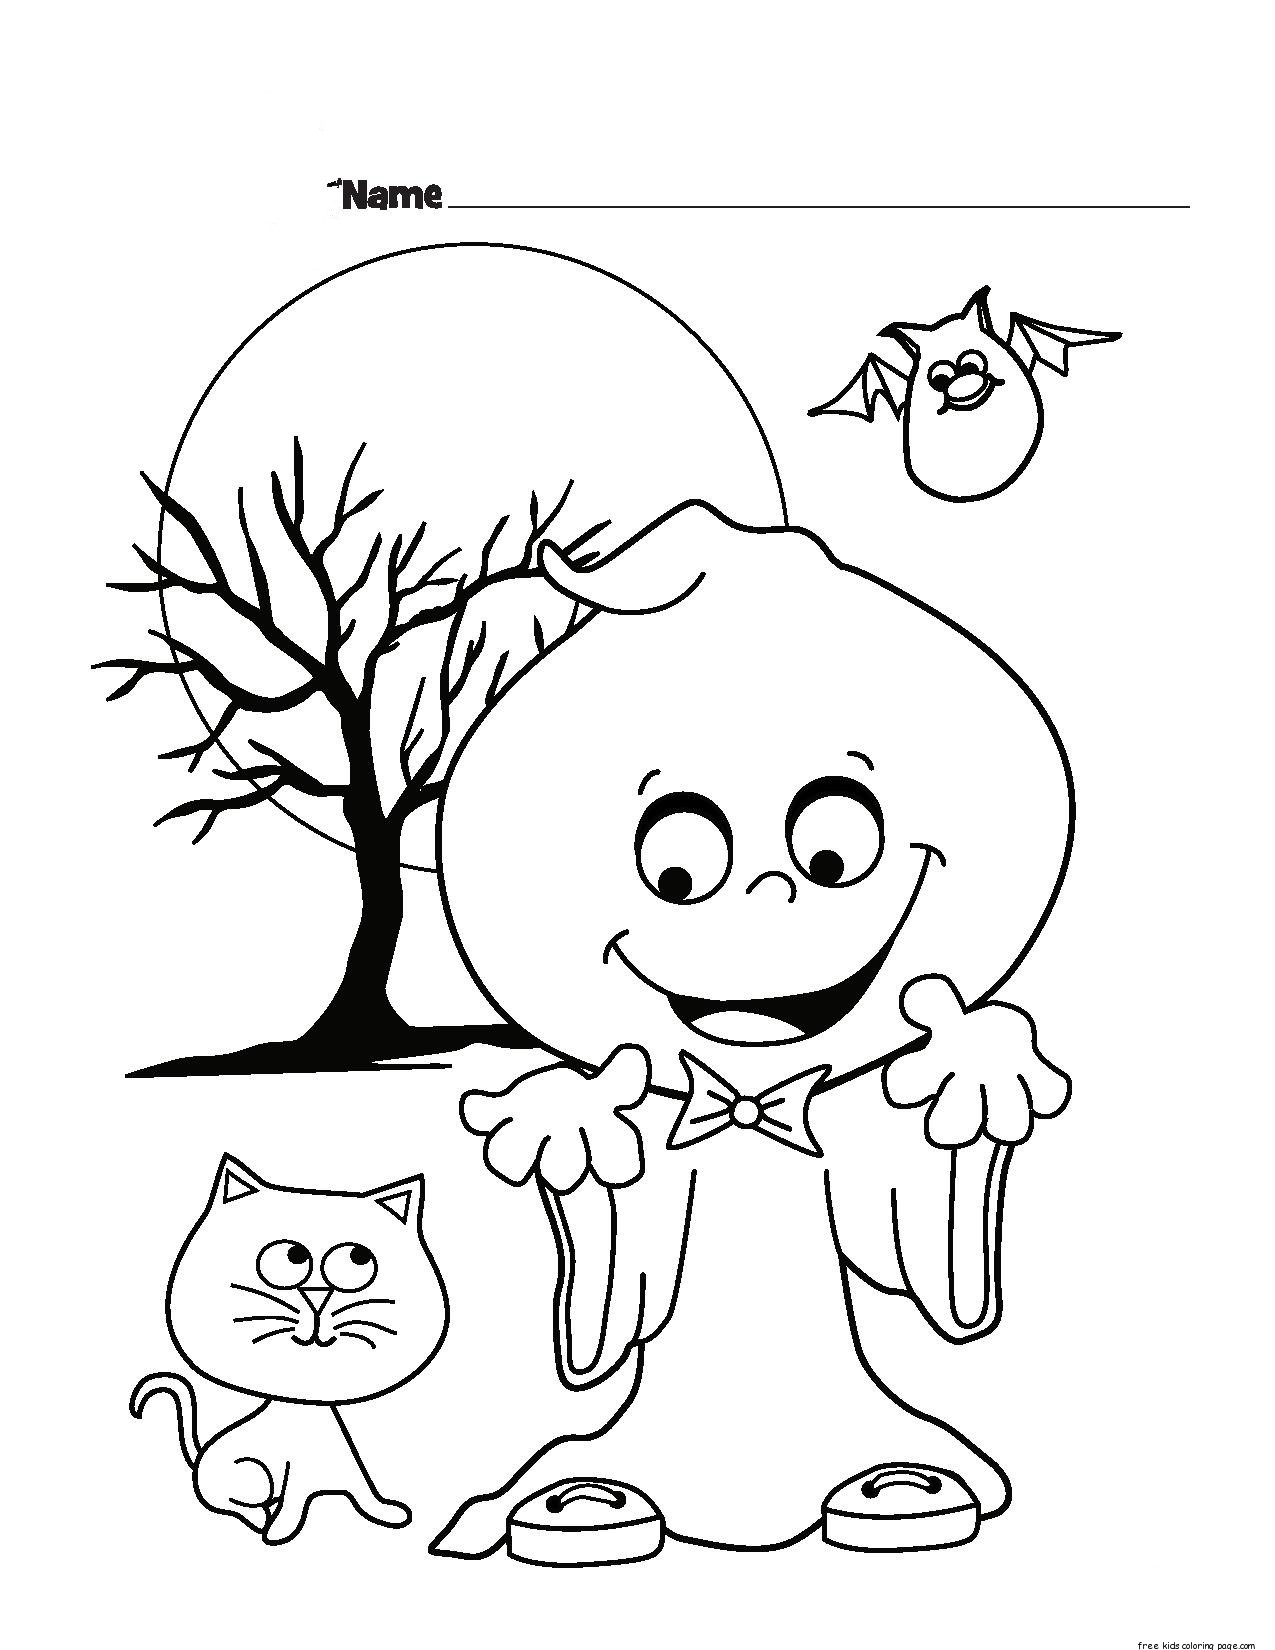 49+ Halloween Coloring Pages For Toddlers